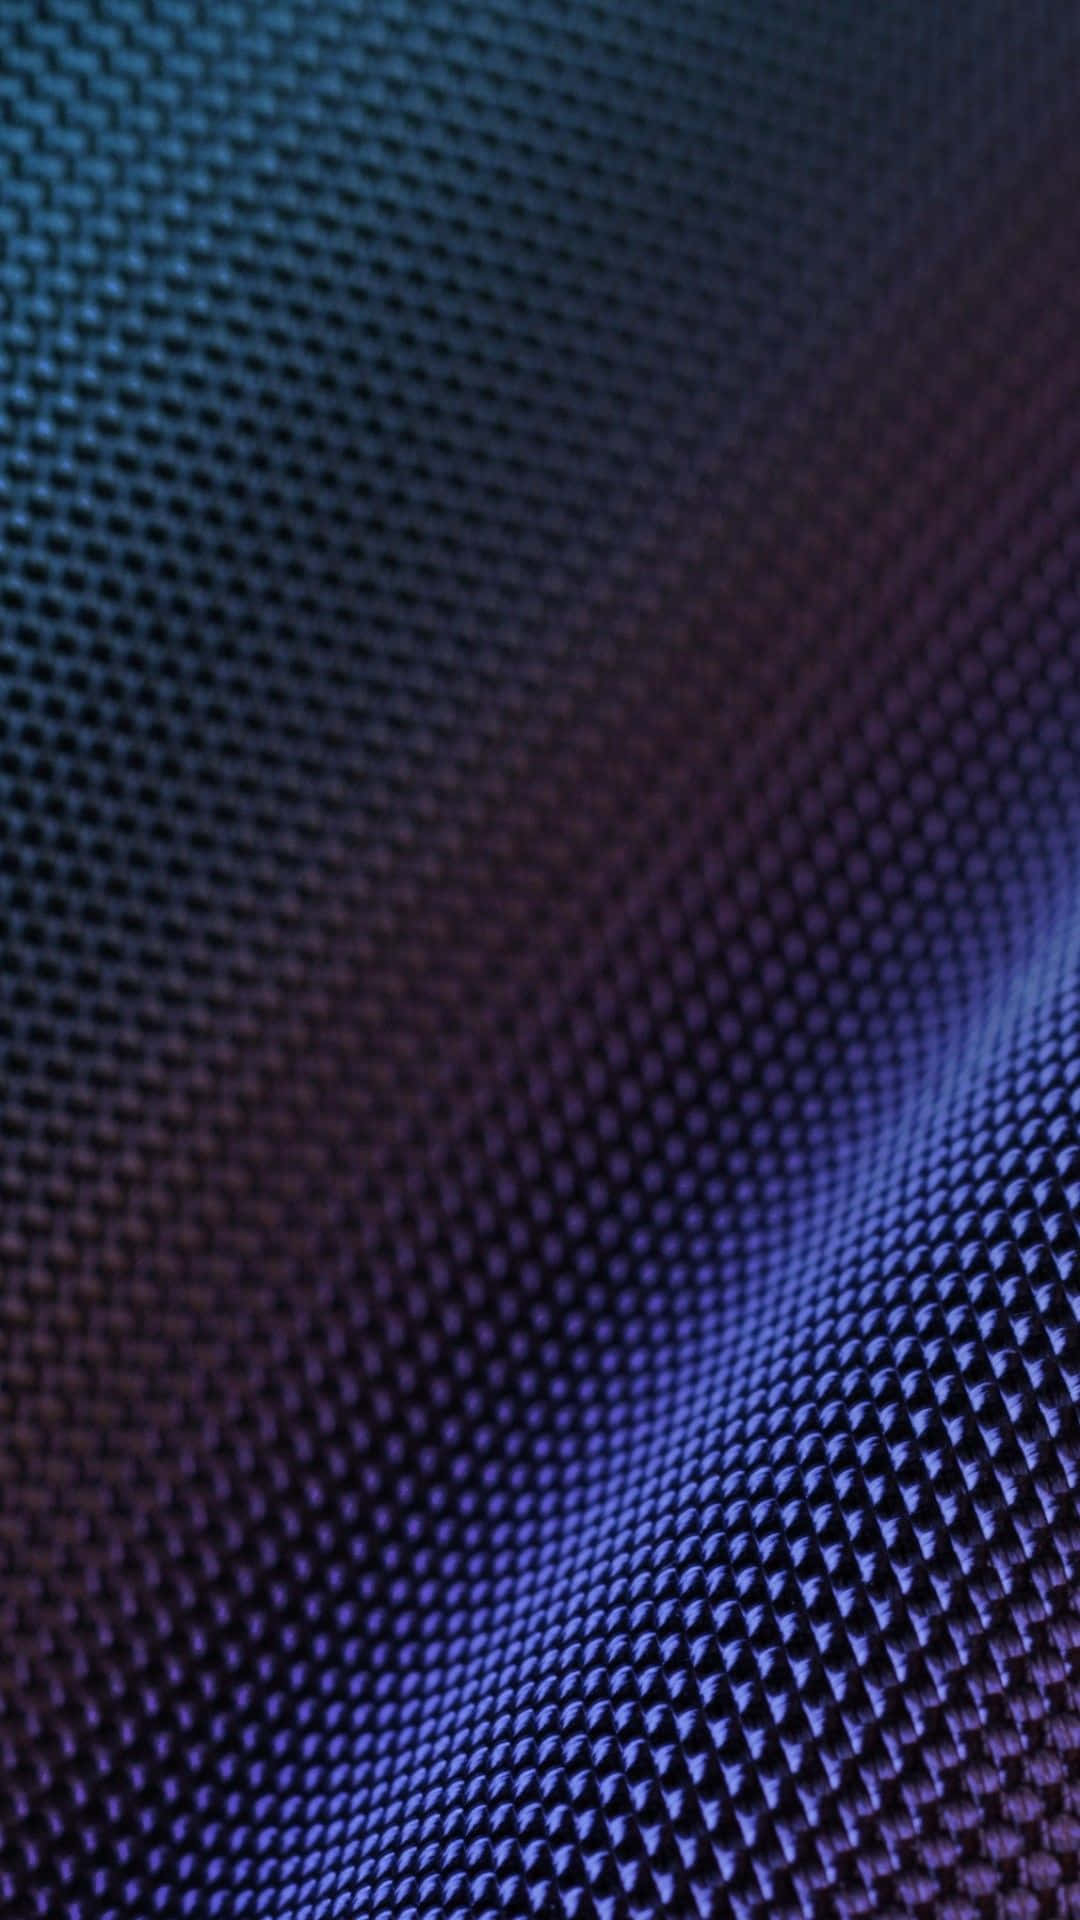 Enhance your iPhone experience with elevated performance of Carbon Fiber Wallpaper